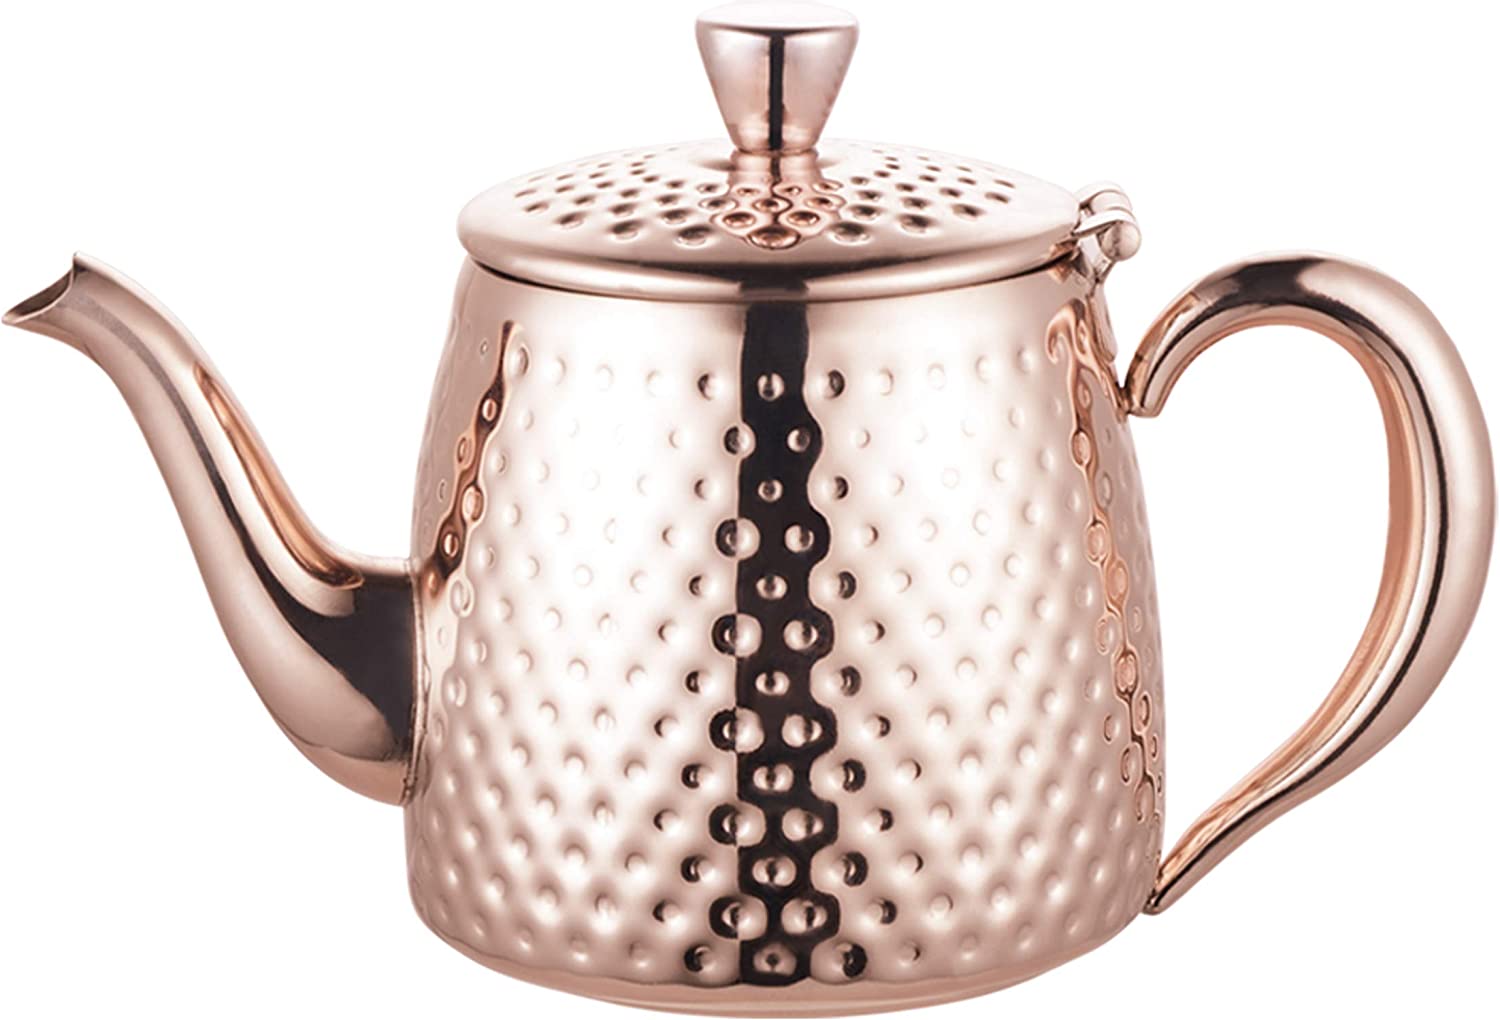 Cafe Ole Café Olé Sandringham Hammered Effect Teapot Made from High Quality 18/10 Stainless Steel and Copper Finish - 35oz, 1.0L, Drip Free Casting, Hollow Handles